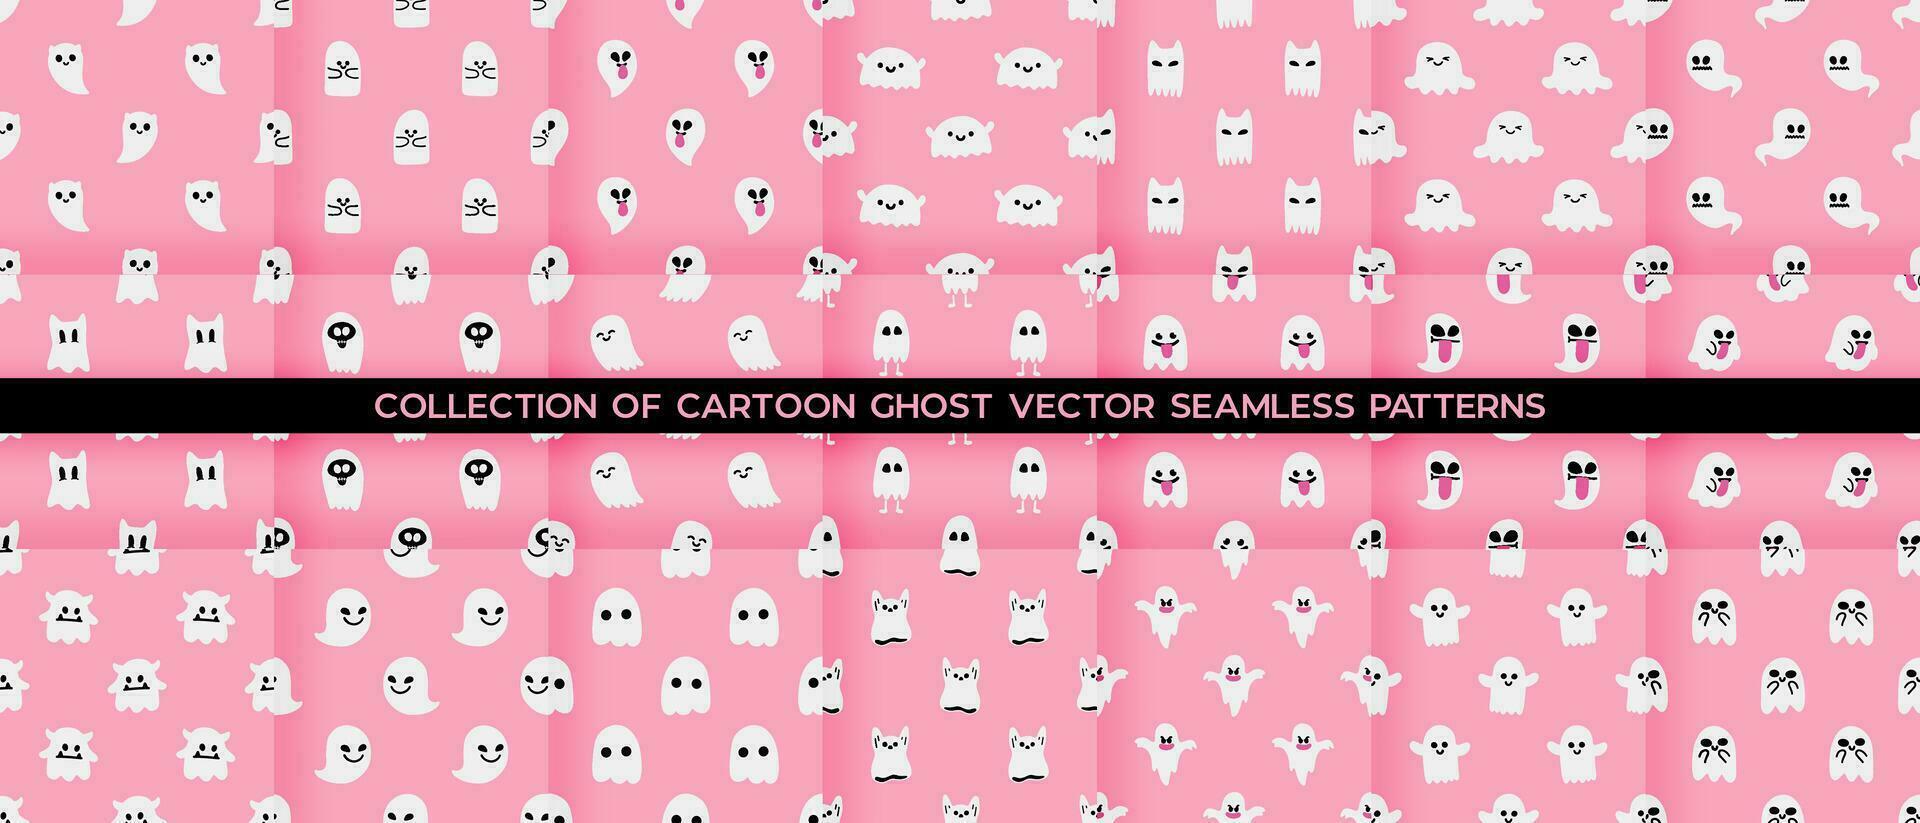 Collection of Cartoon ghost vector seamless pattern background.